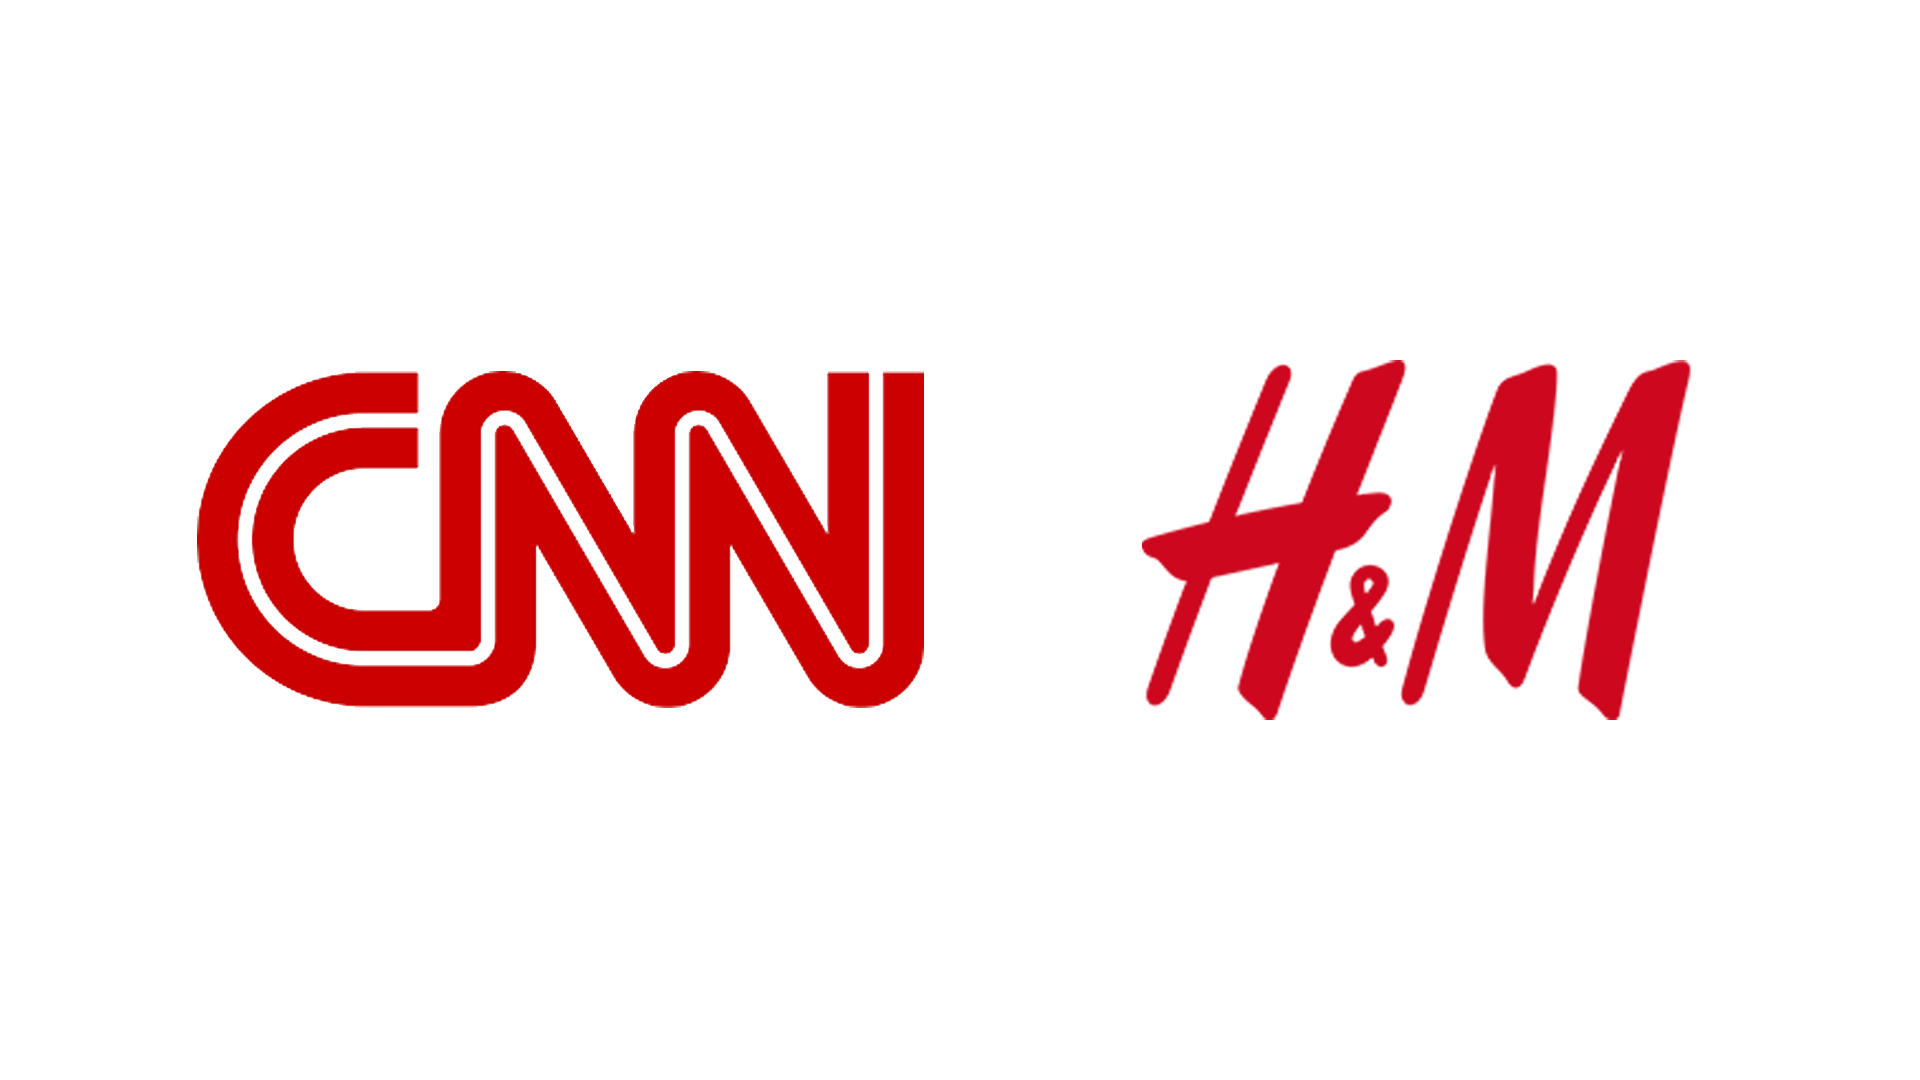 The logos of CNN and H&M 